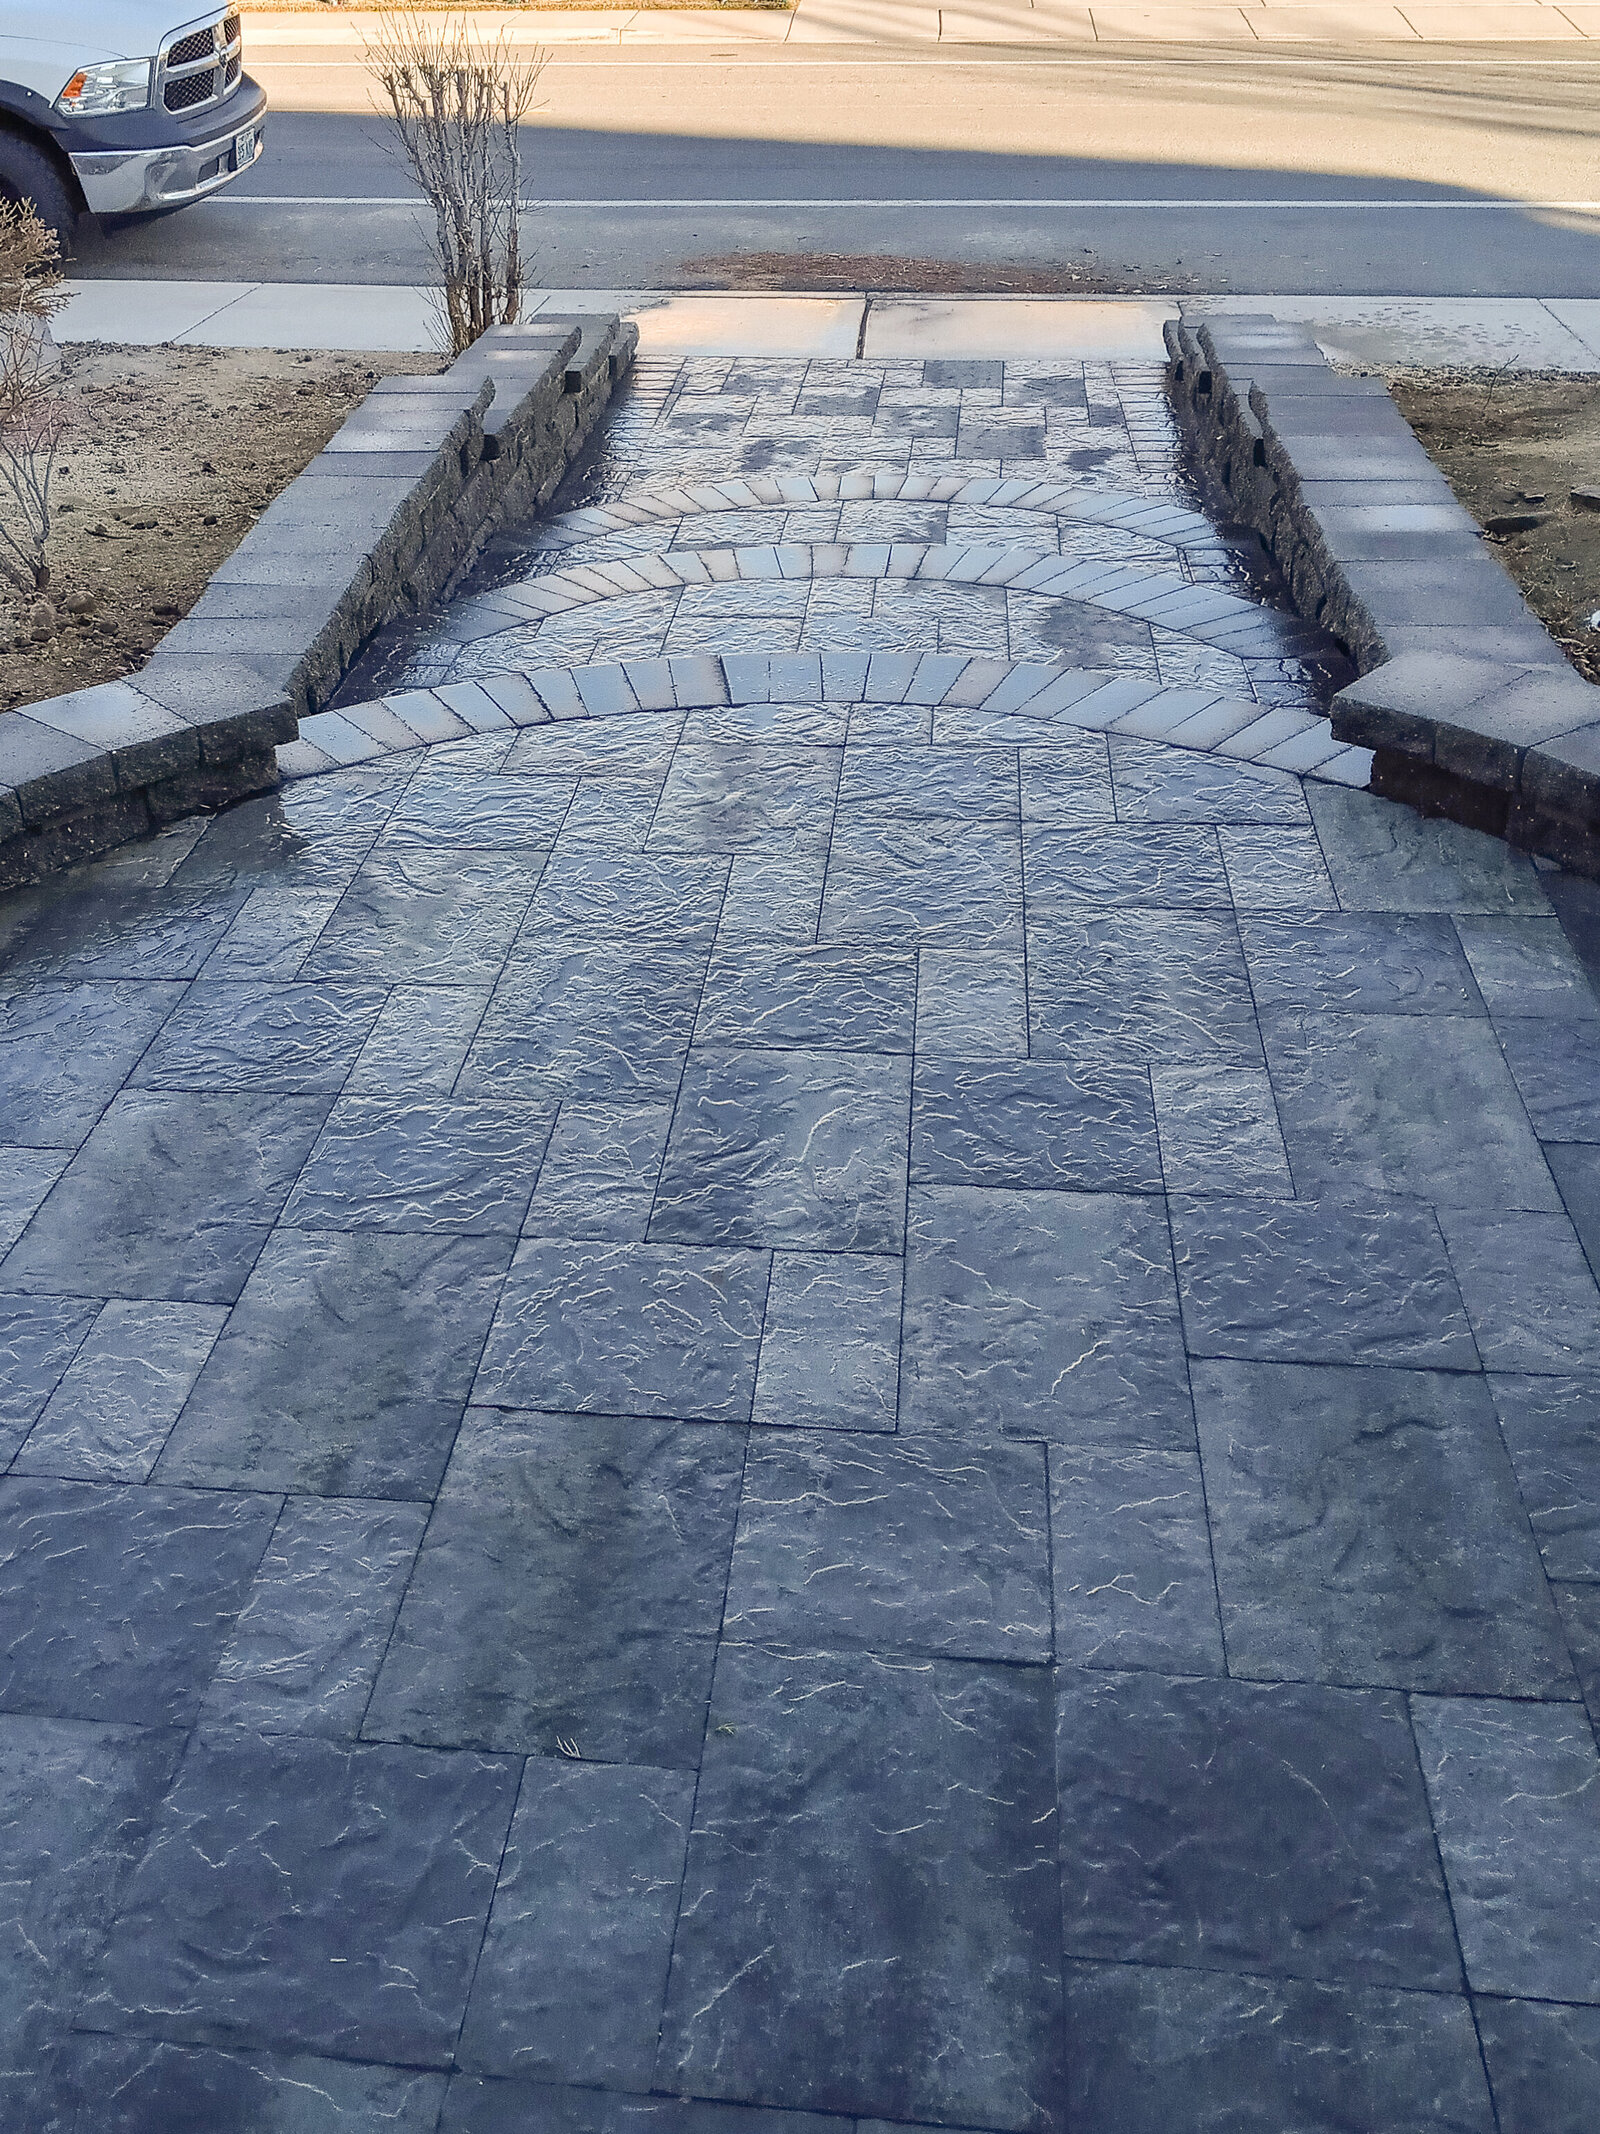 Professional landscaping and masonry in Tahoe